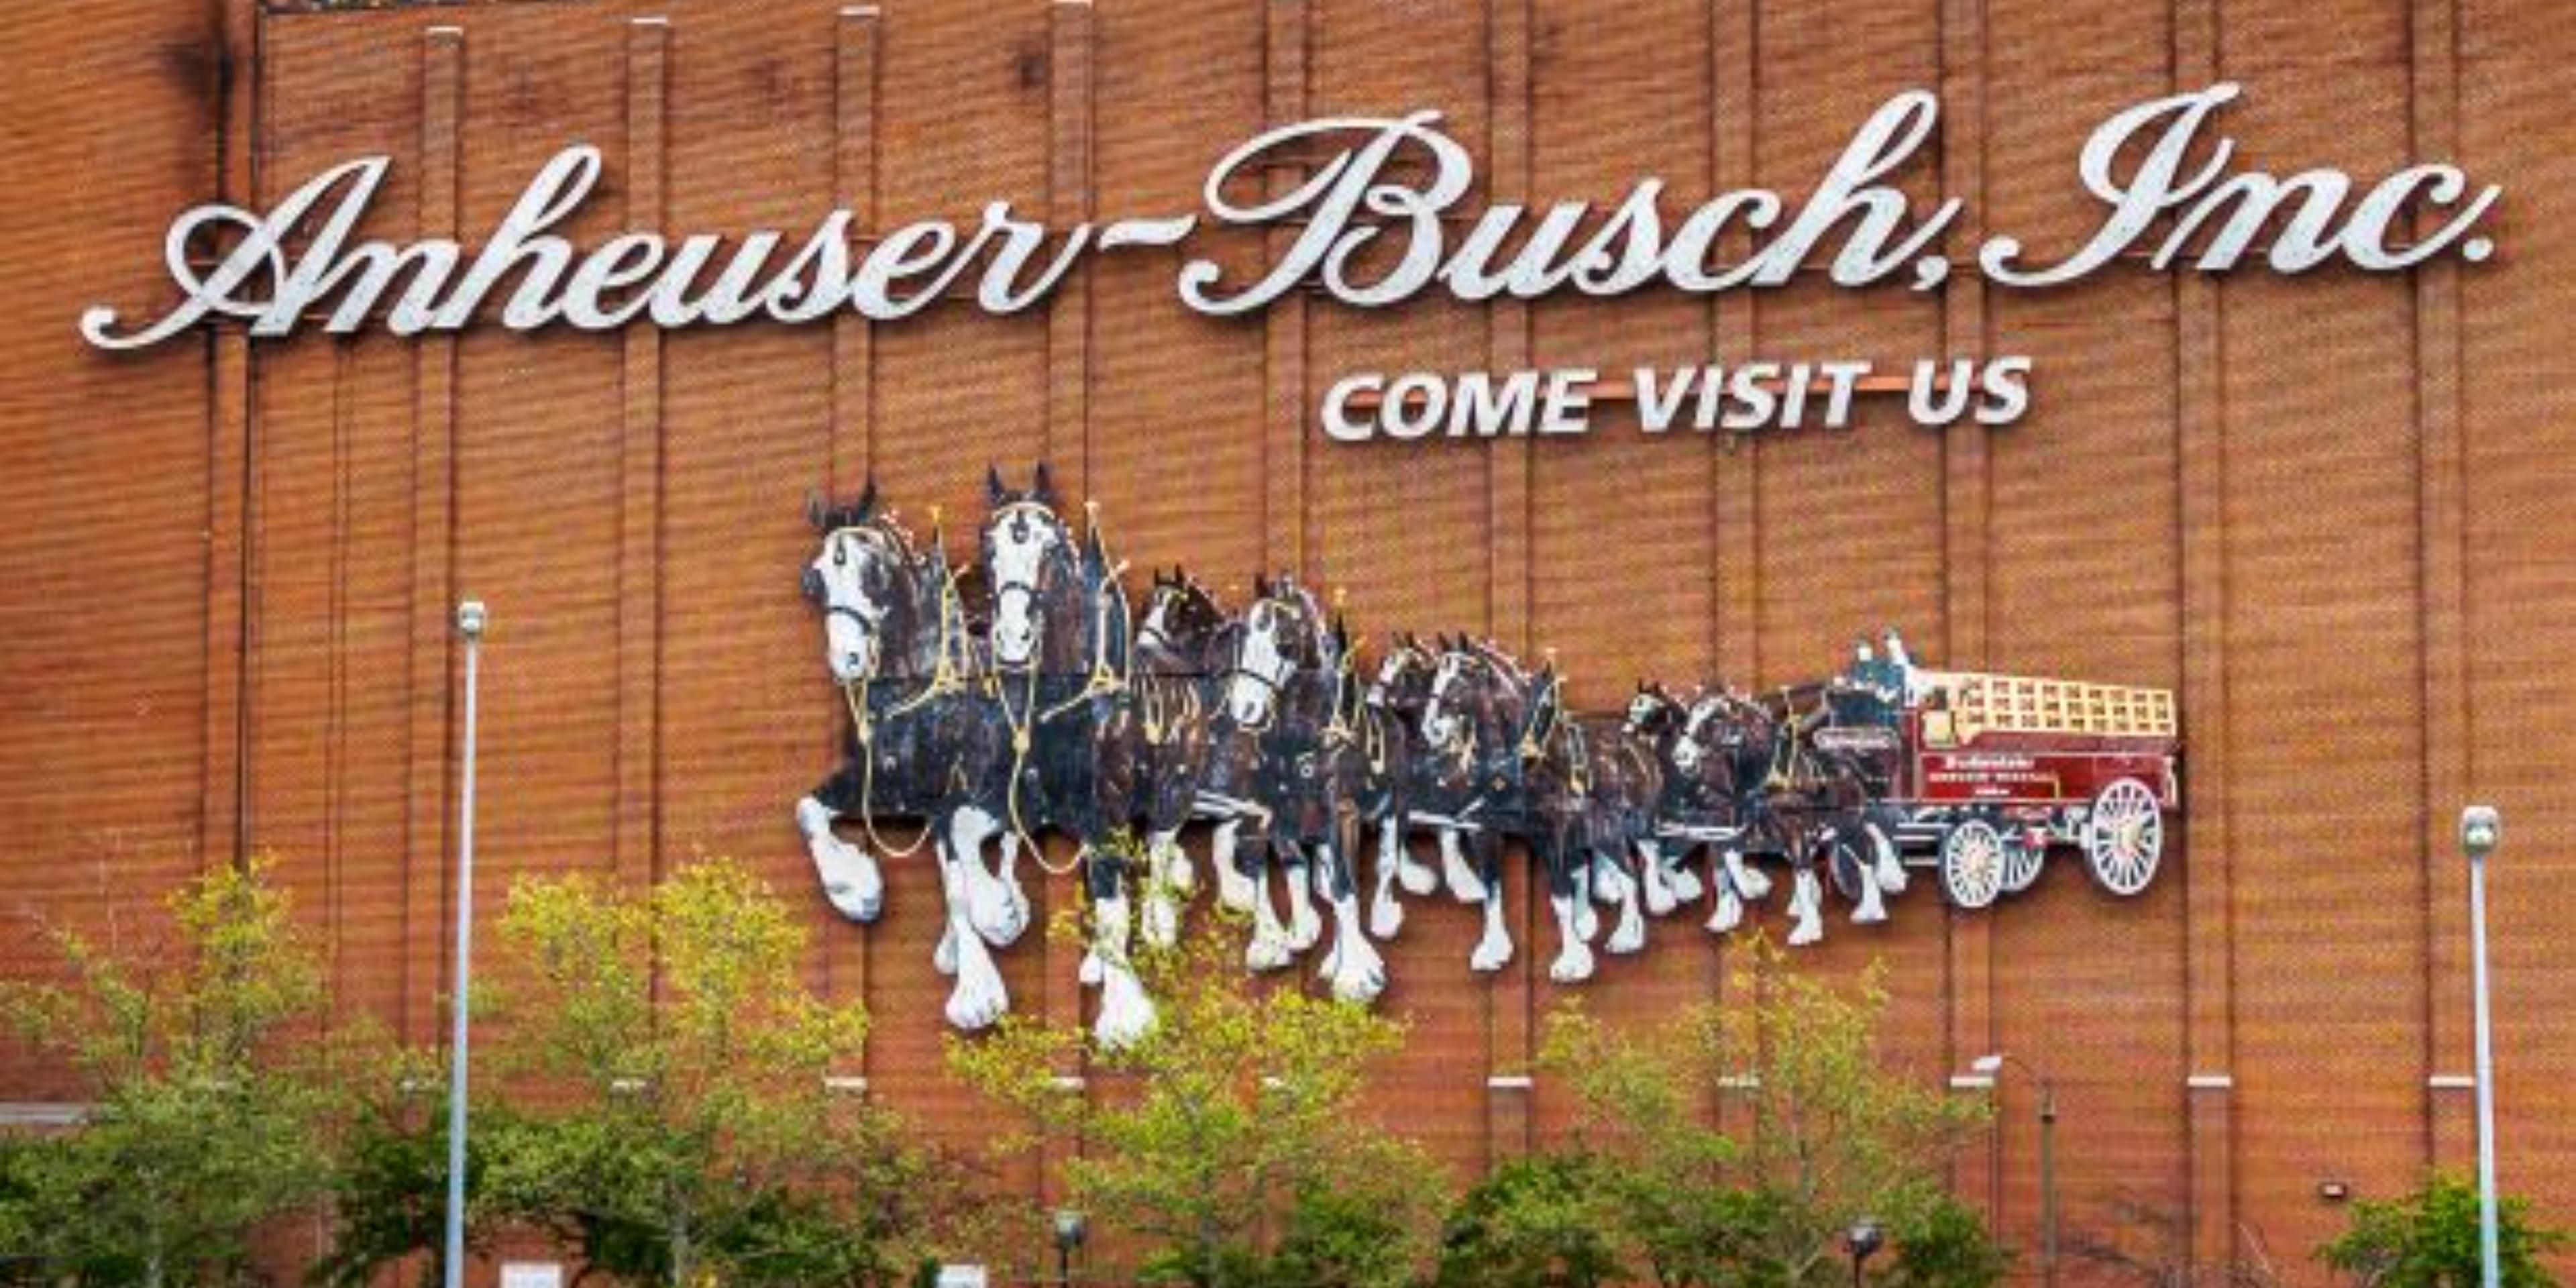 Before you leave St. Louis, take a tour of the Anheuser-Busch brewery! You will learn everything about the process of making and packaging beer, and those over 21 can enjoy free samples of the beers on tap. A quick 30-minute drive from the hotel.